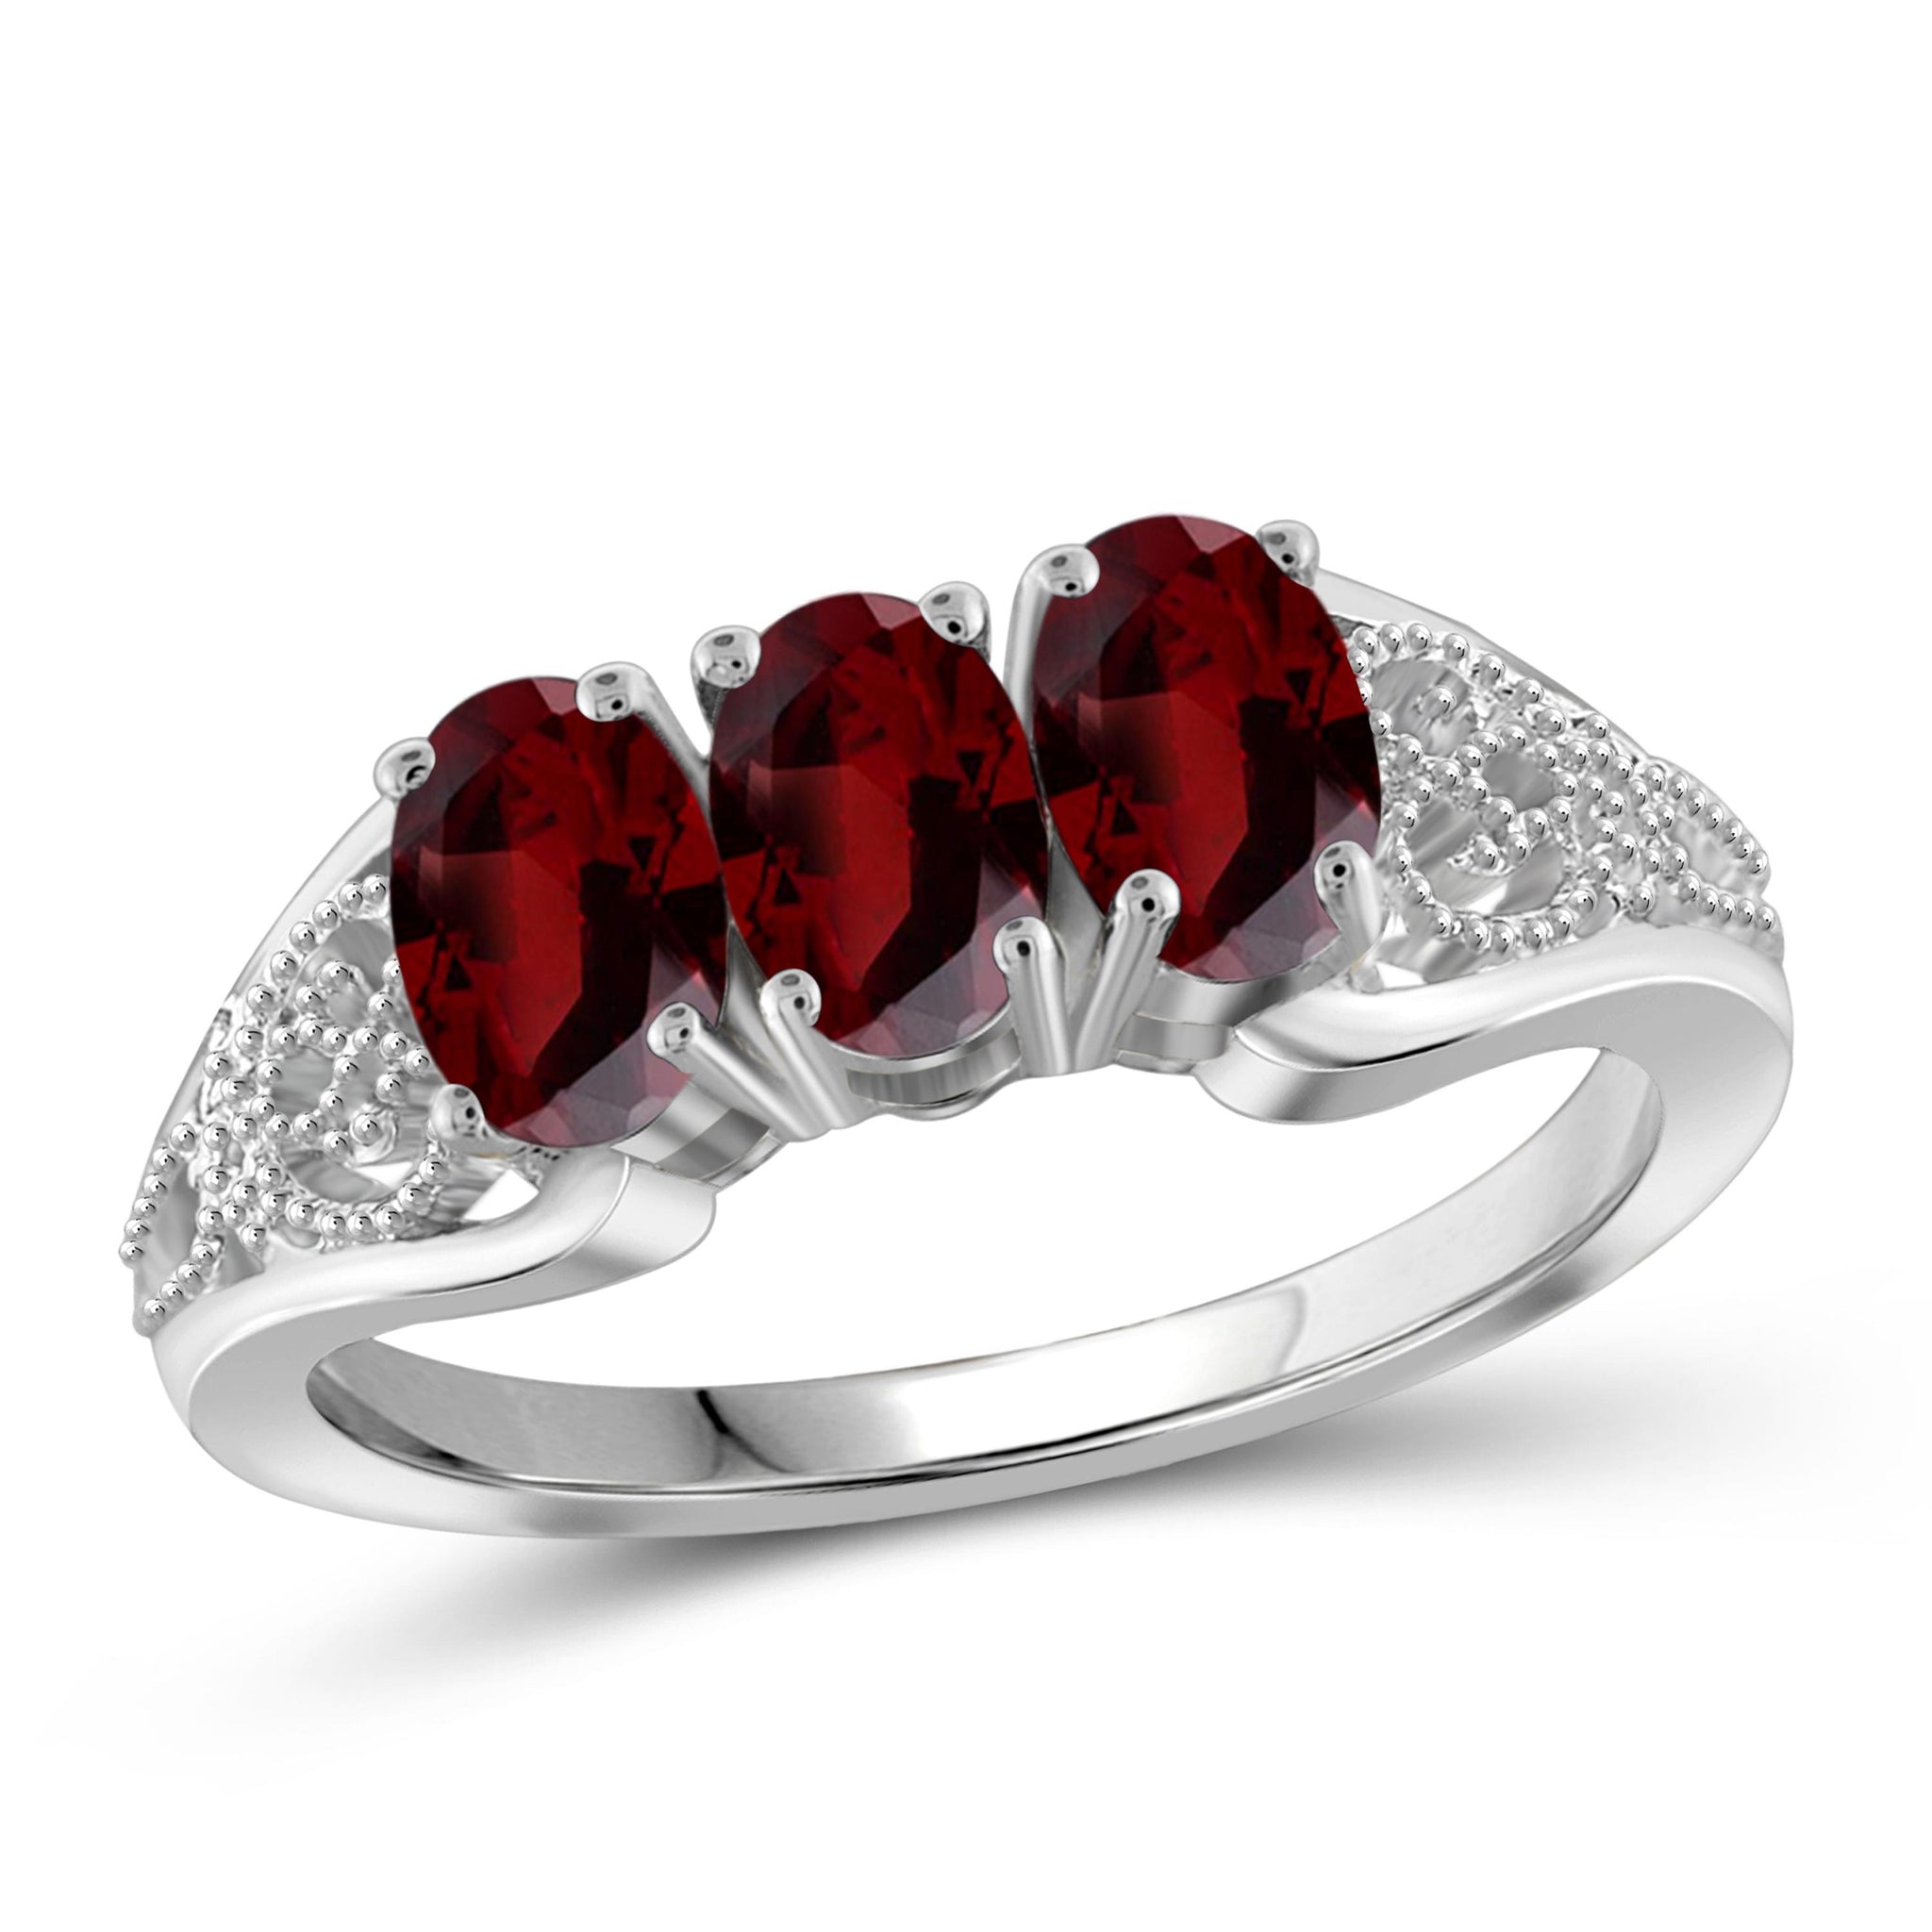 JewelonFire 1 3/4 Carat T.G.W. Garnet Sterling Silver Ring - Assorted Colors